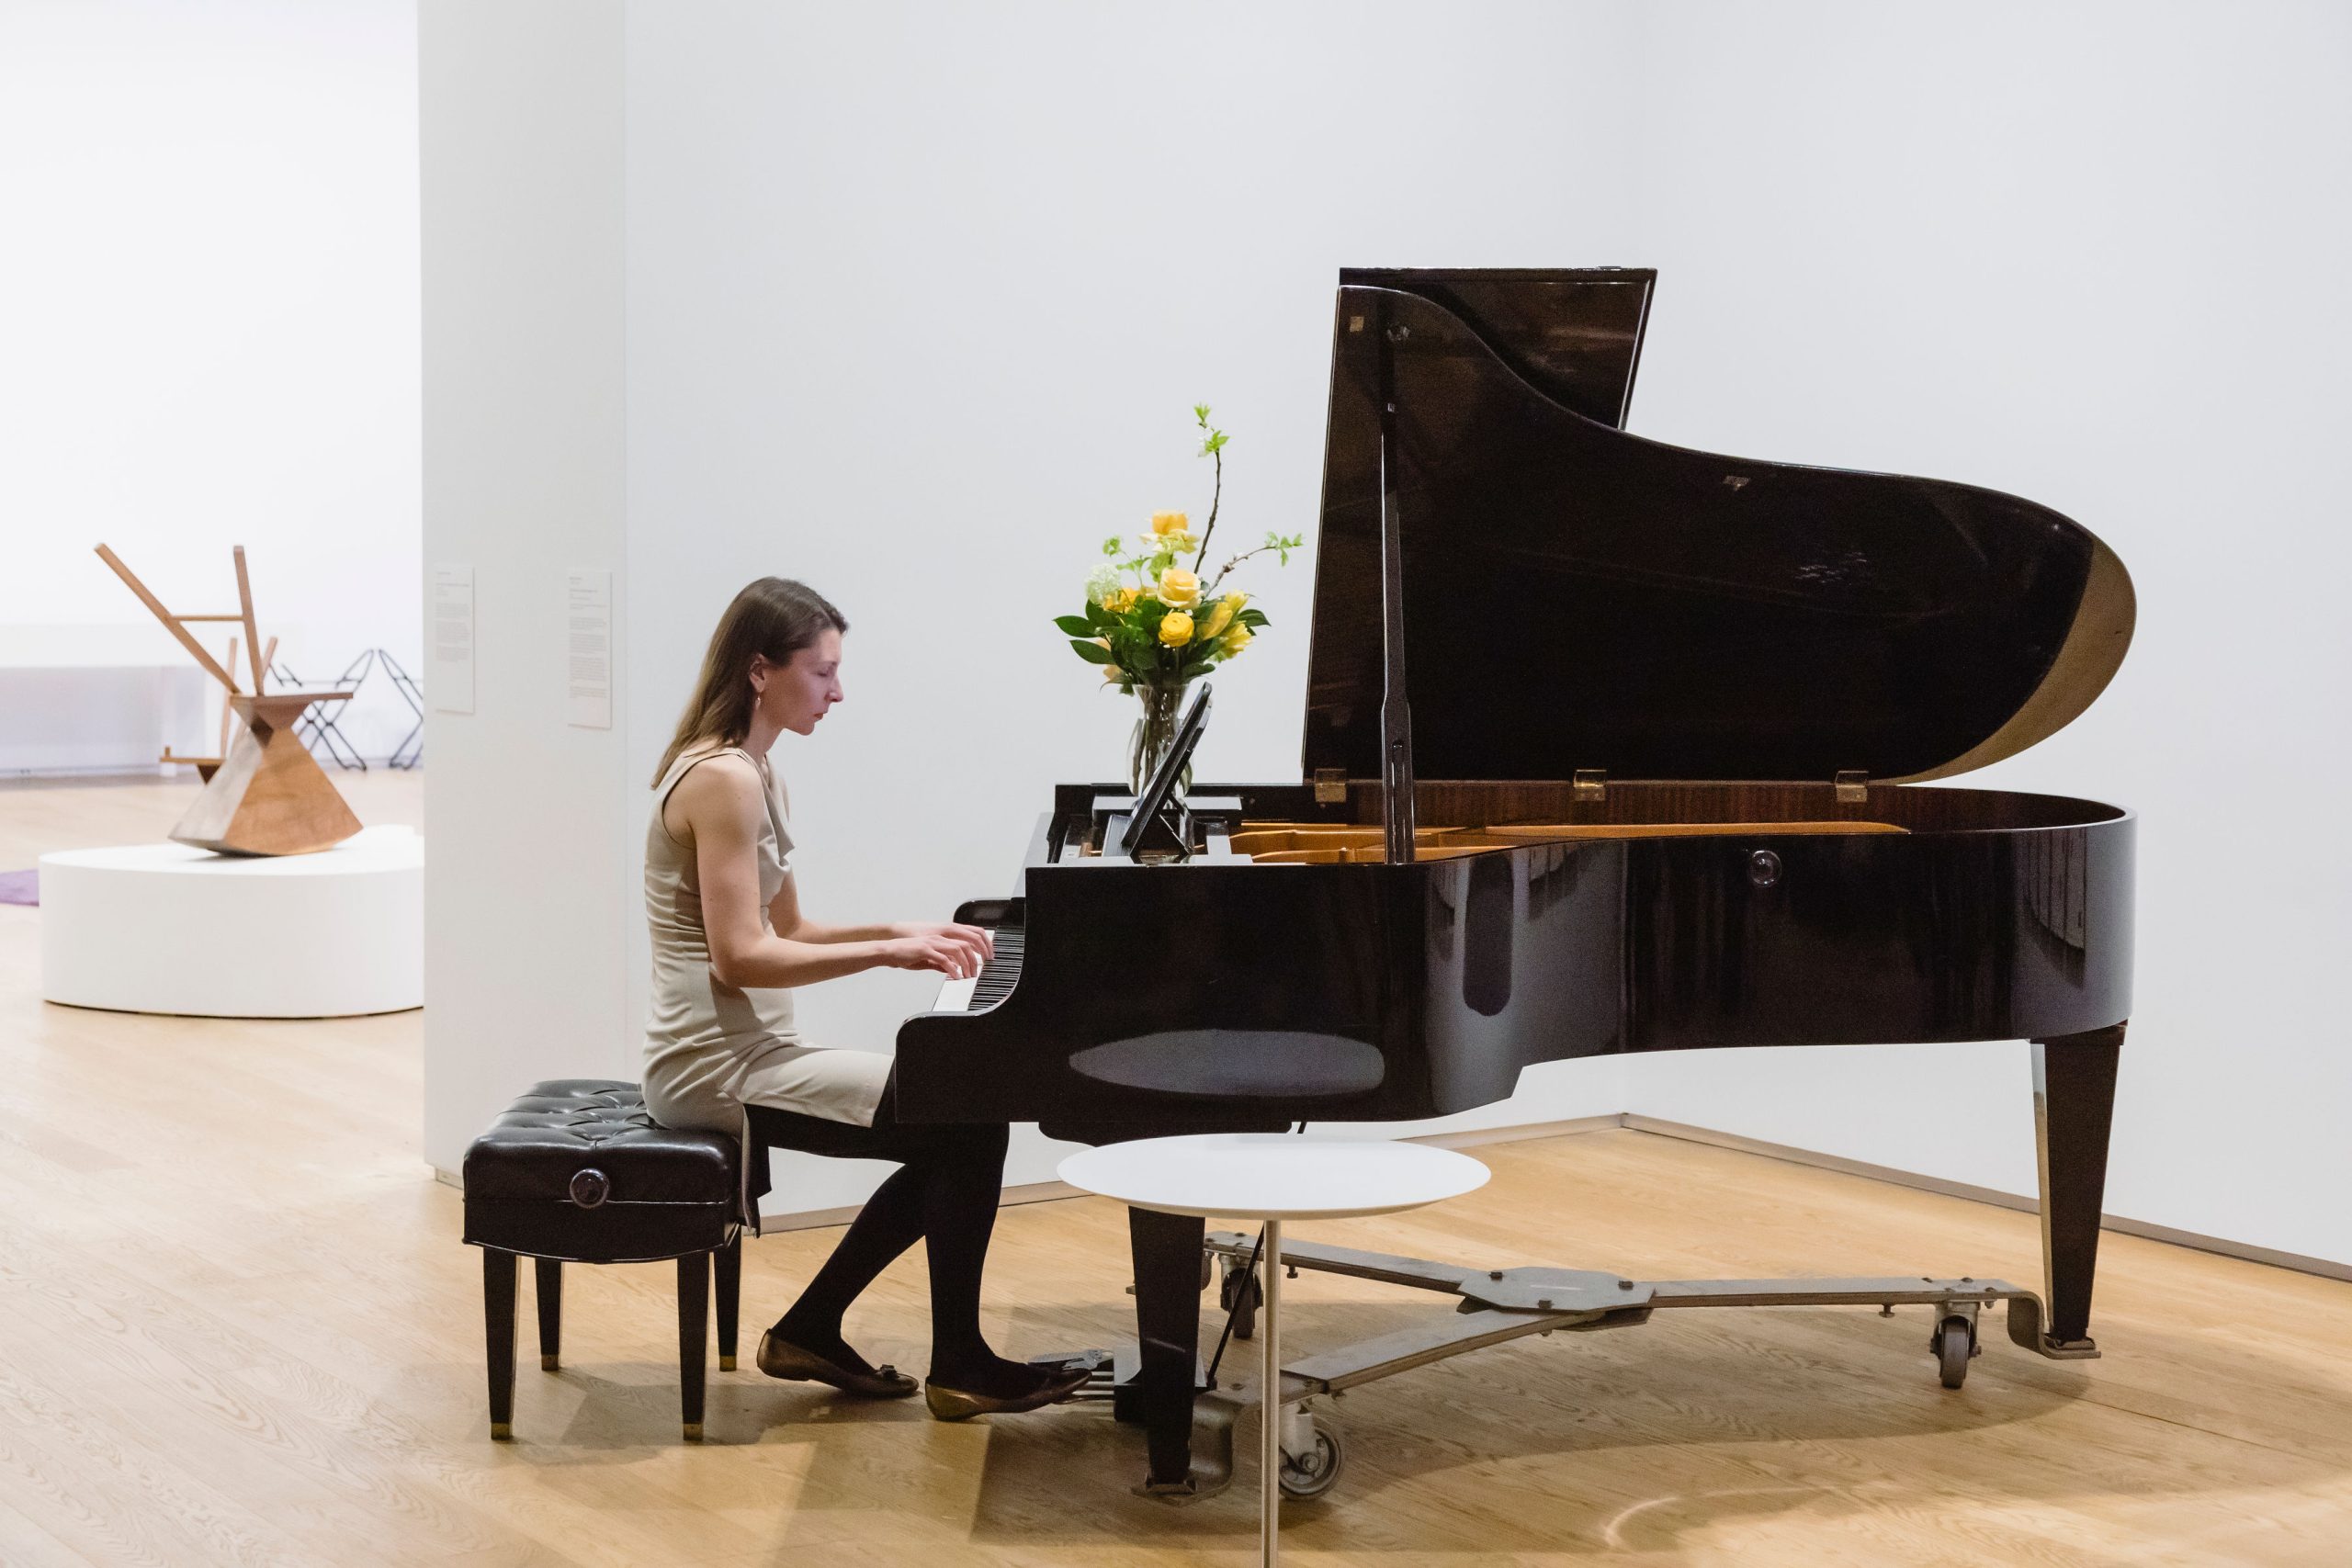 Sofia Mycyk performs live on a grand piano at Remai Modern